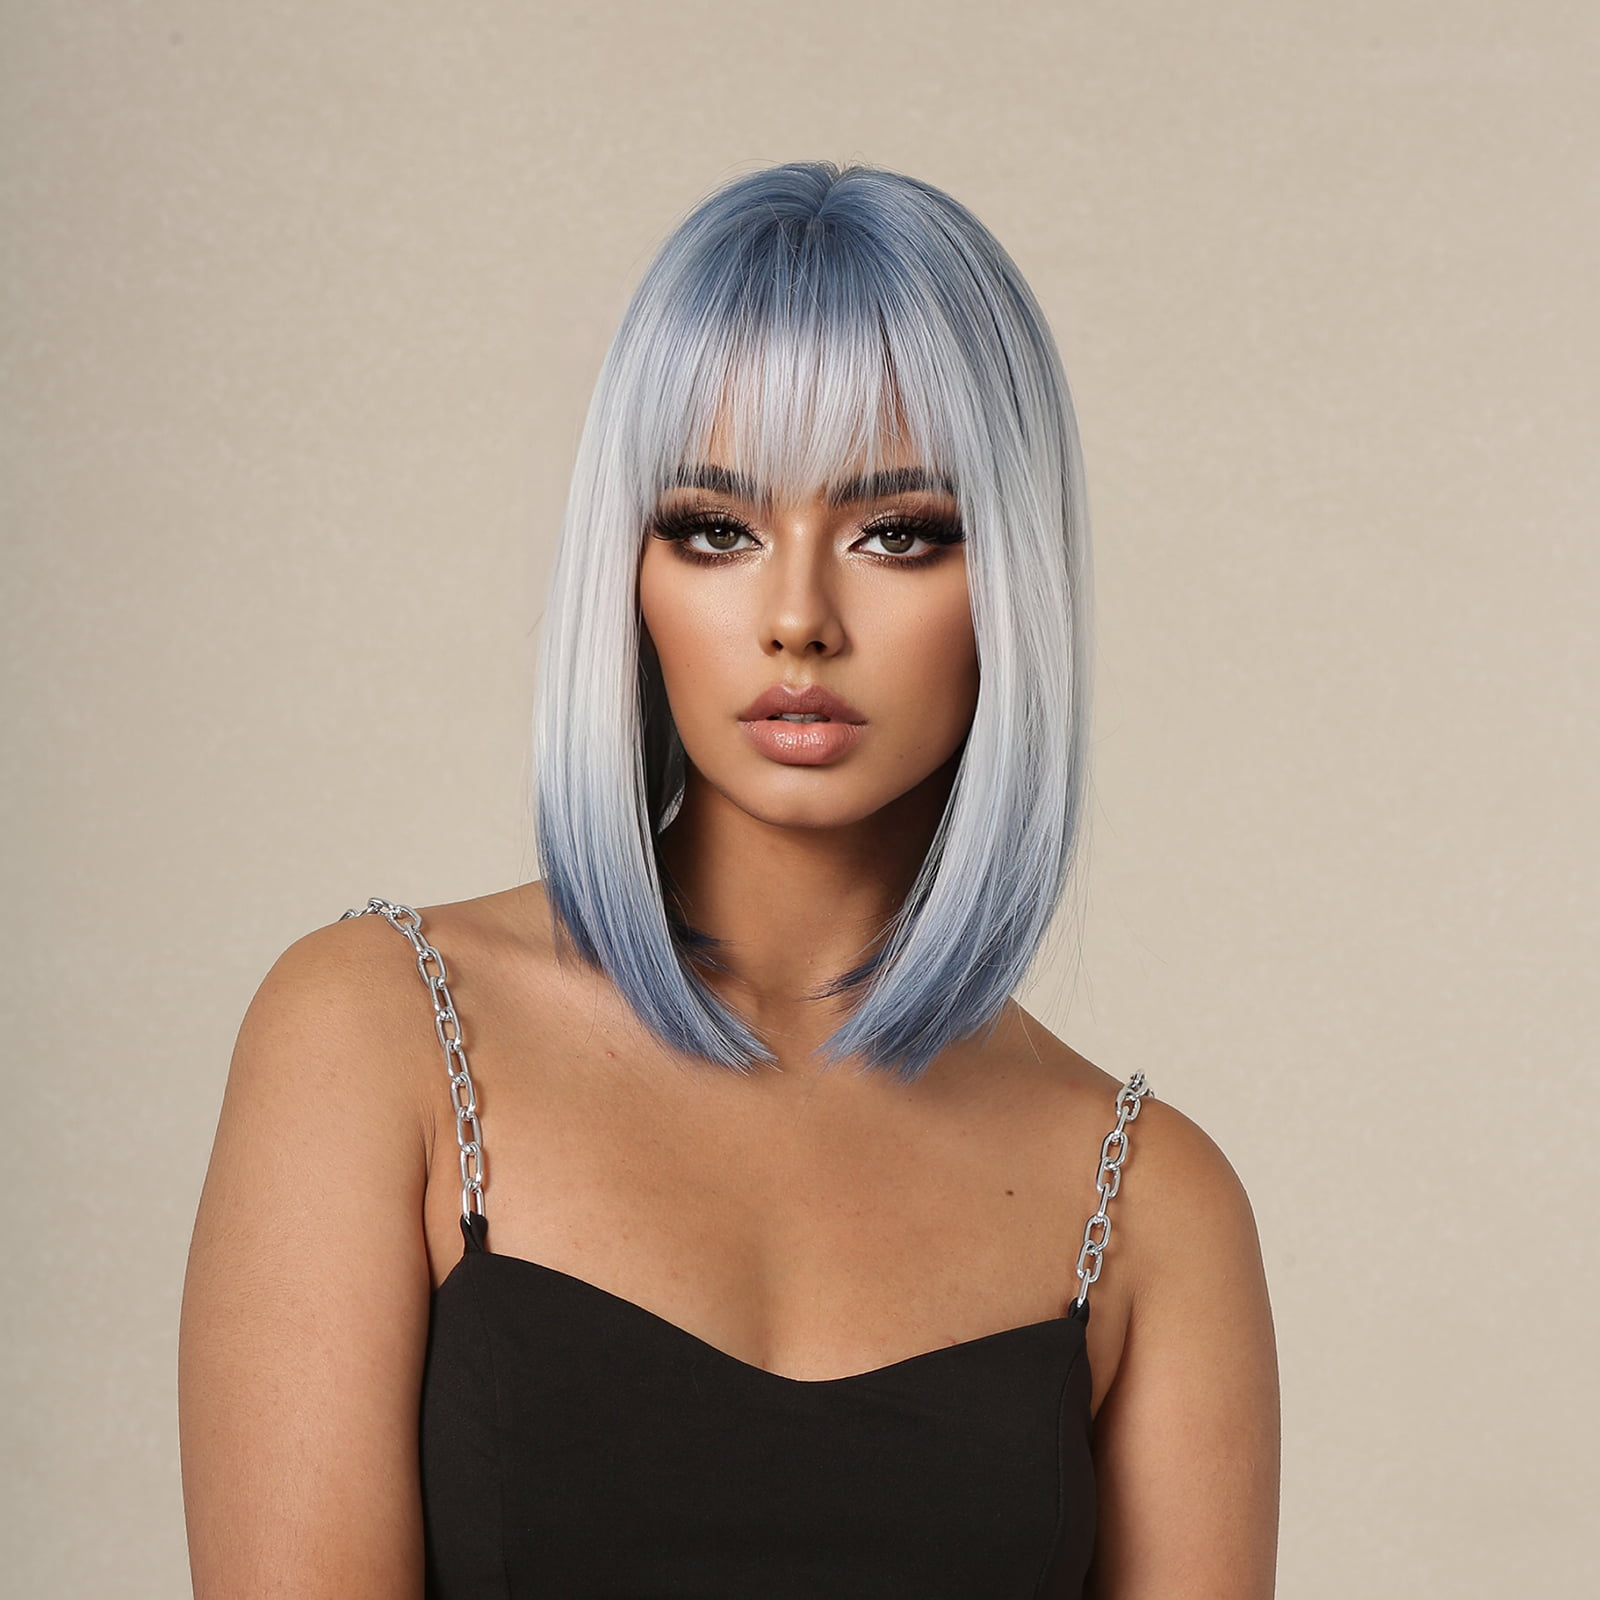 Stylish synthetic wig in silver brown with short straight hair, designed for convenience and ready to wear